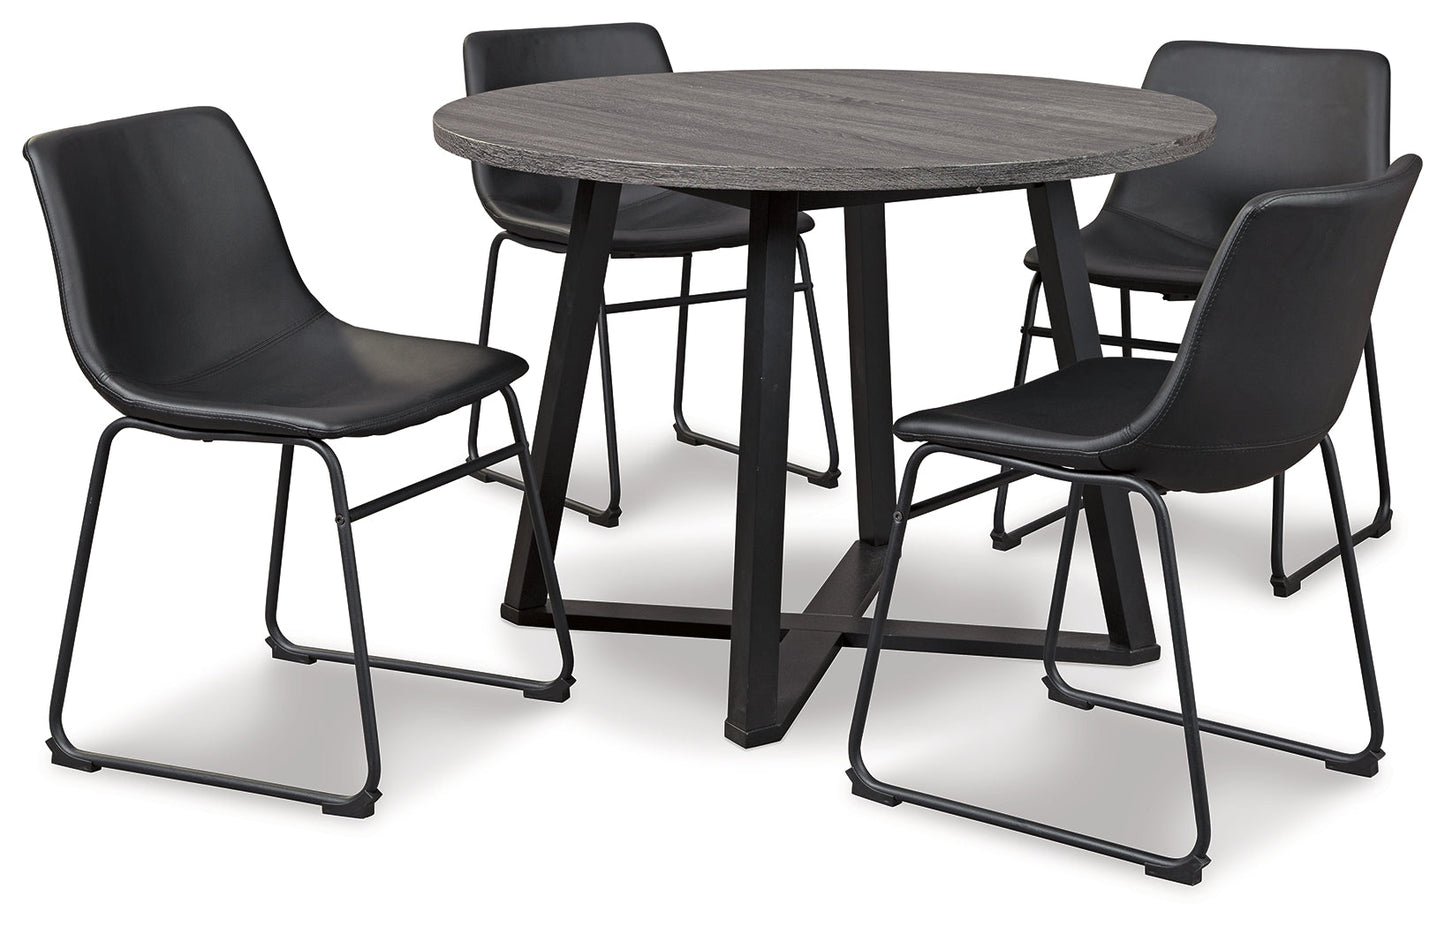 Centiar Black Dining Table and 4 Chairs